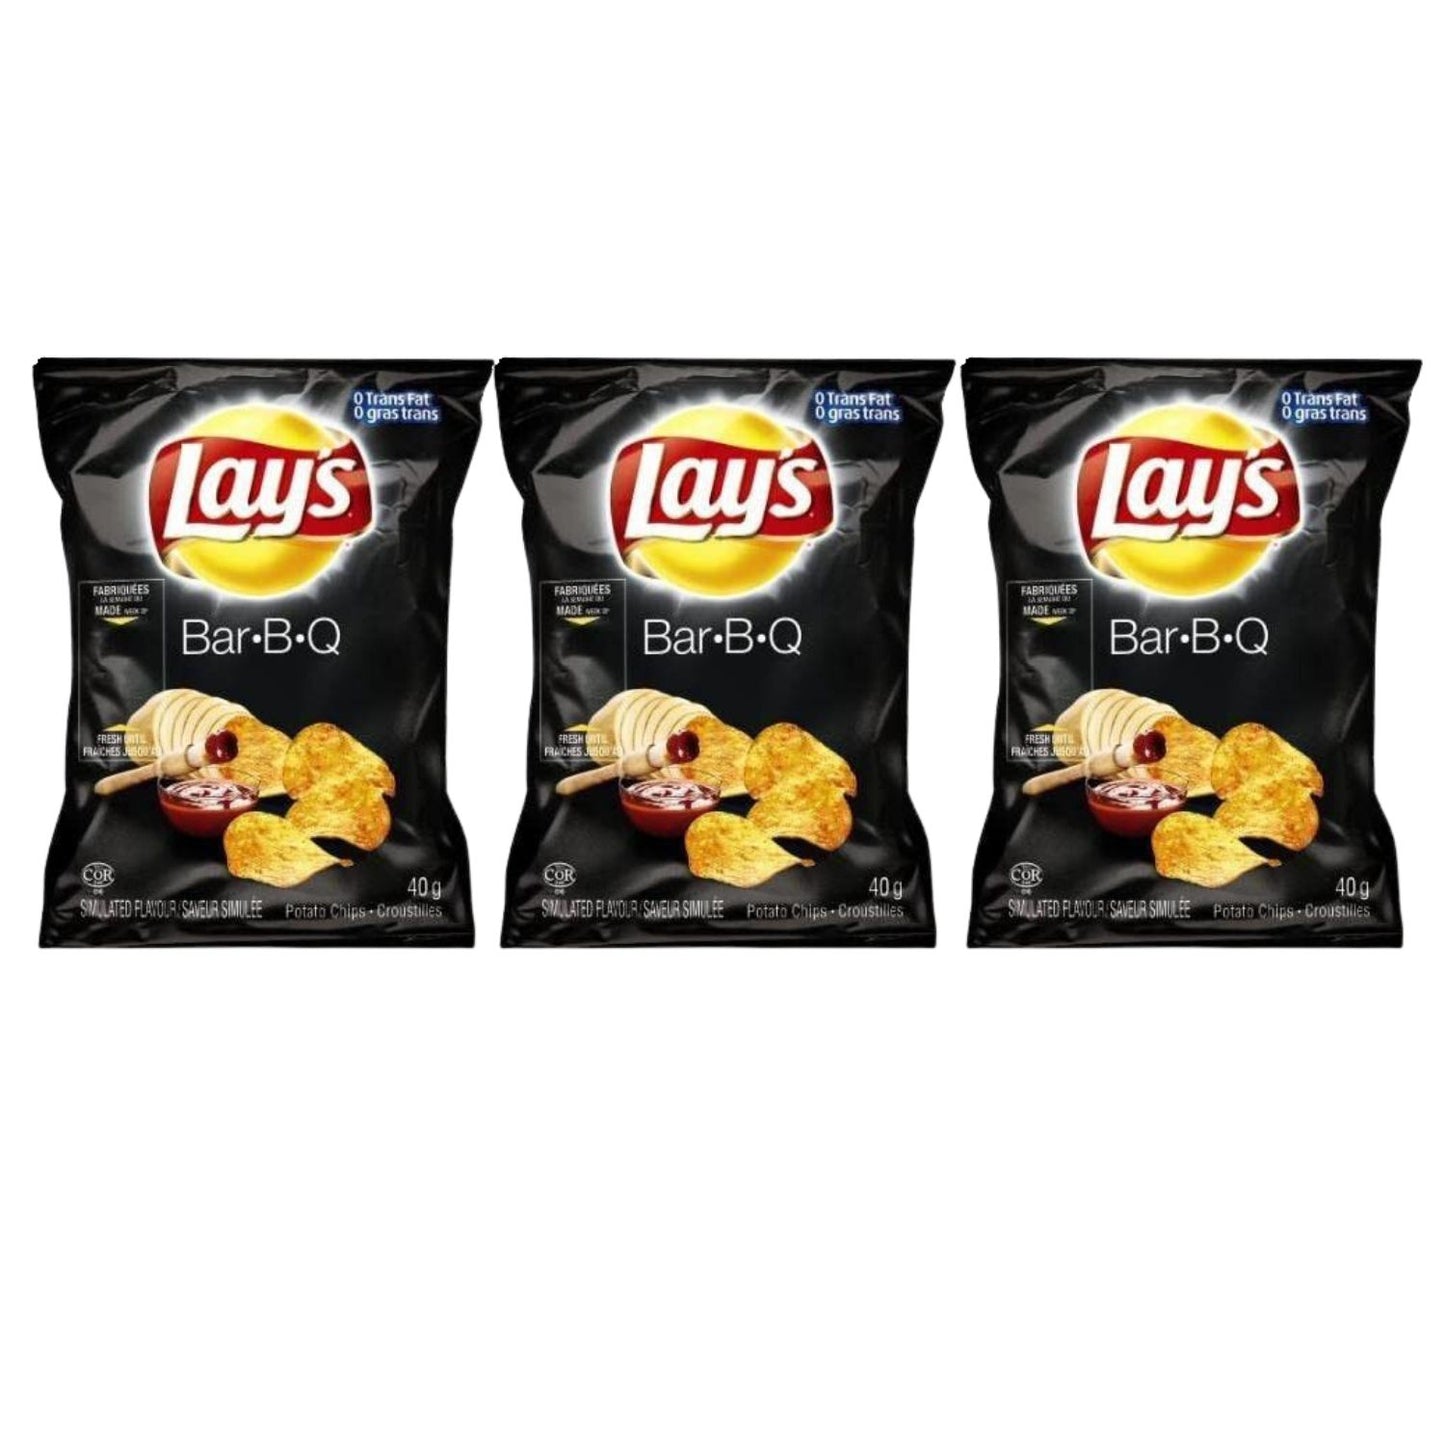 Lays Barbecue Potato Chips Snack Bag pack of 3